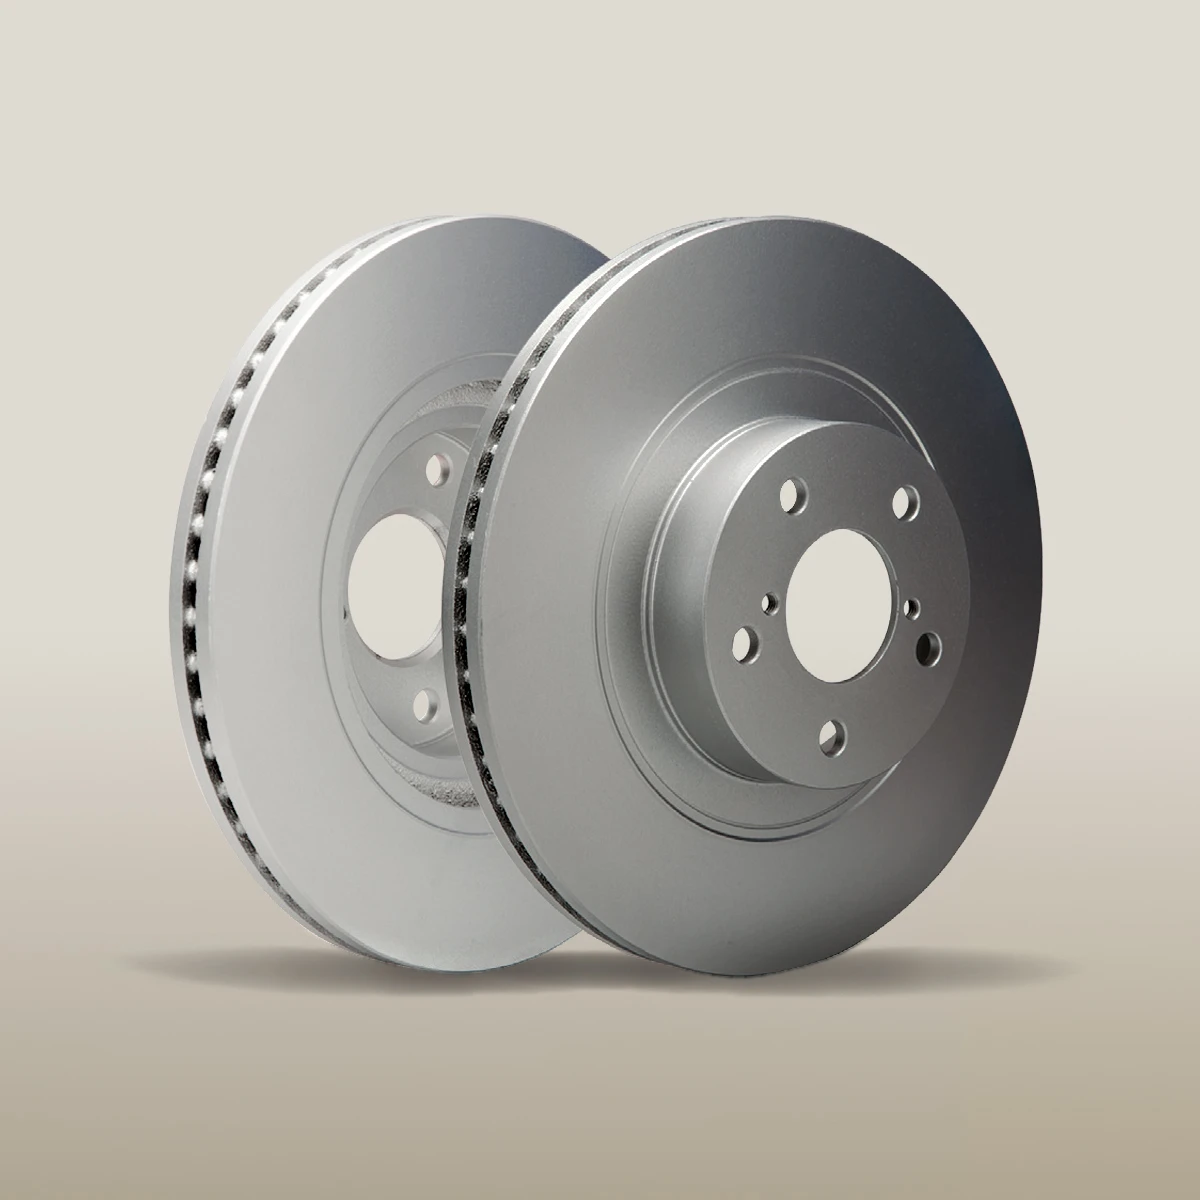 Two brake rotors isolated on a beige background.